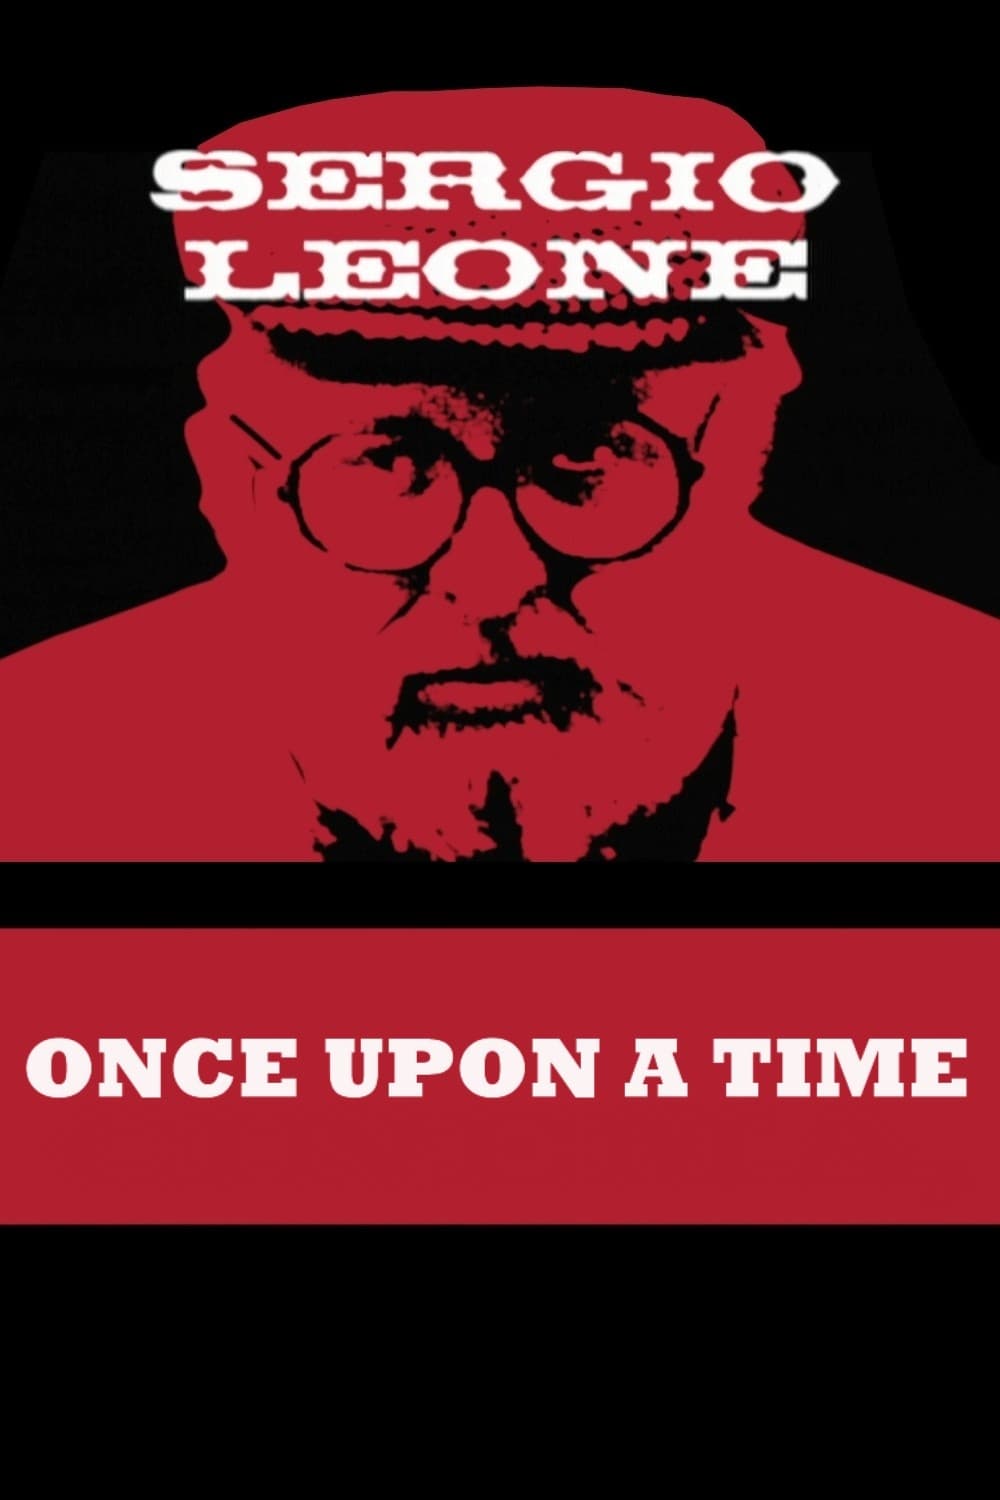 Once Upon a Time: Sergio Leone